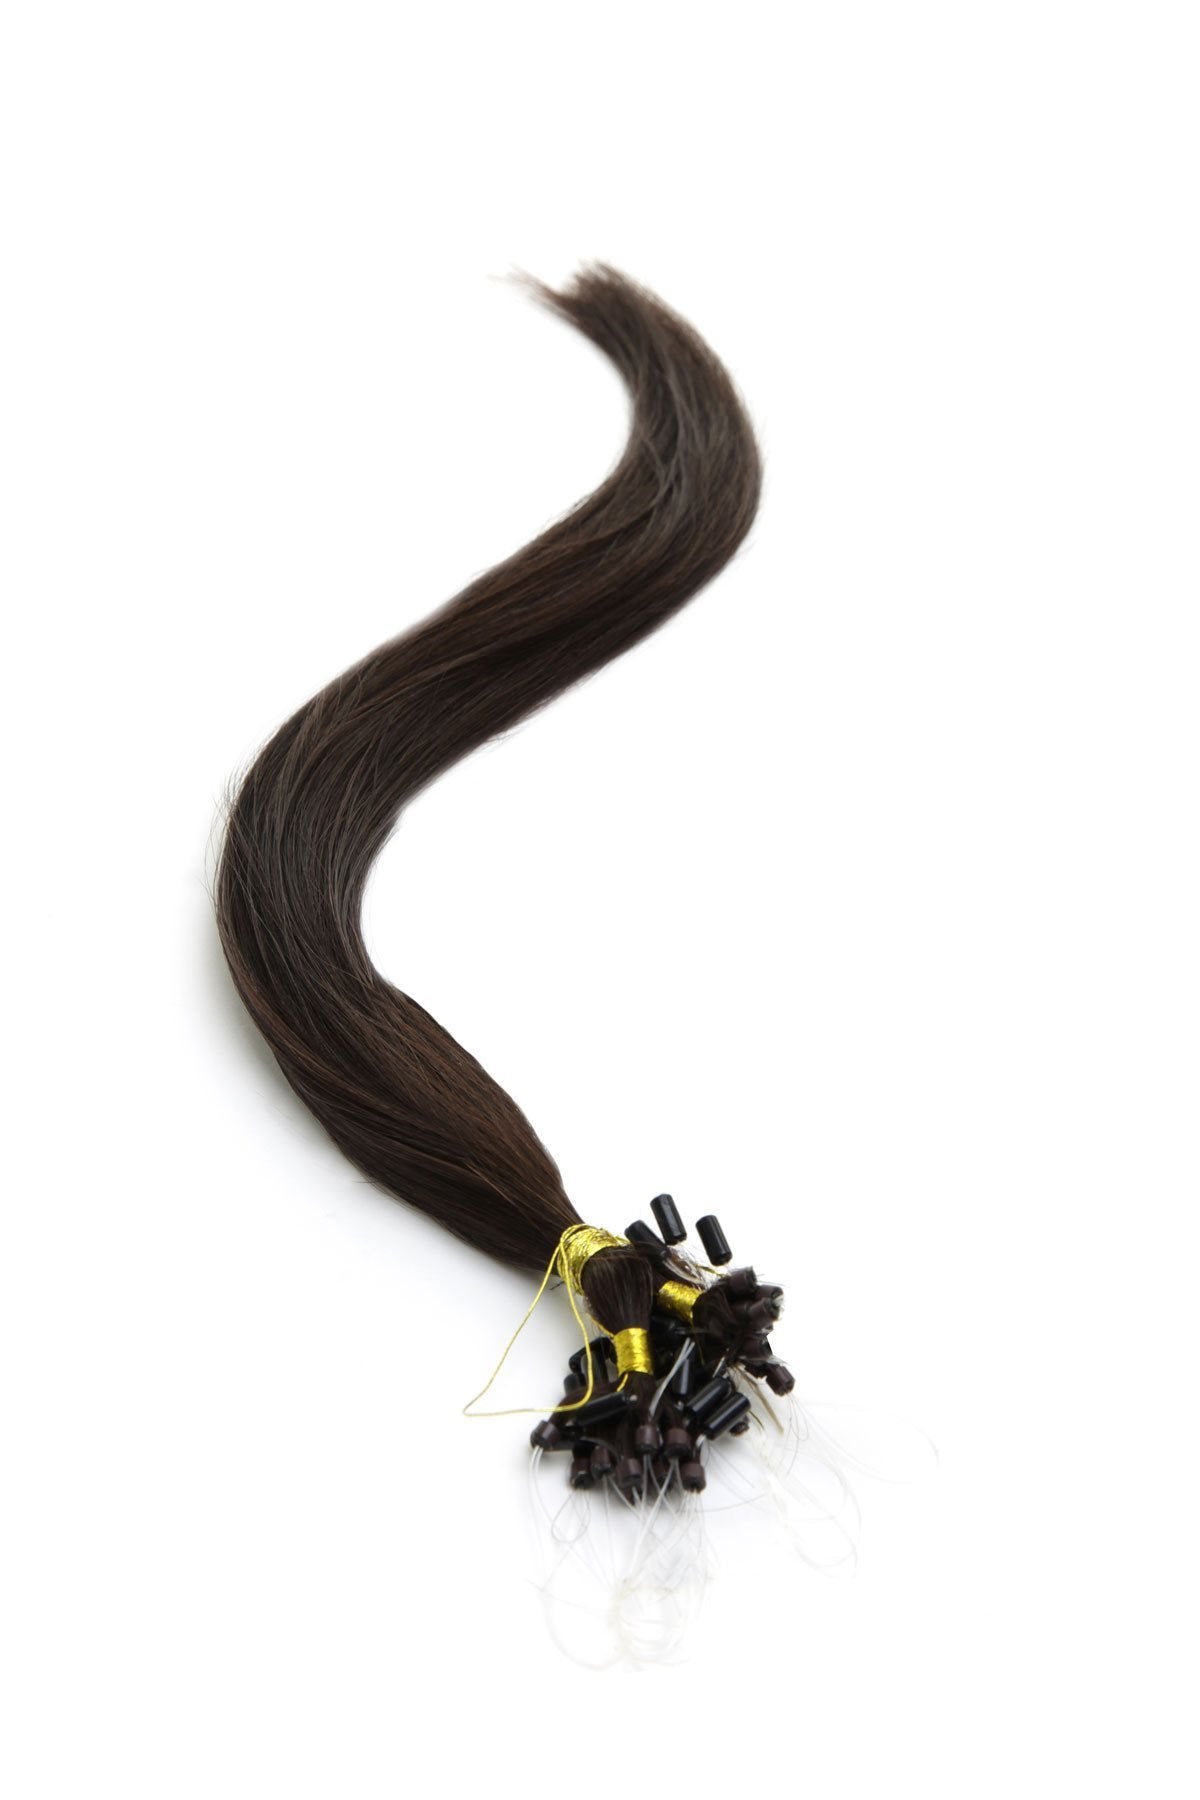 Micro Ring Hair Extensions | 22 inch Brownest Brown (2) - beautyhair.co.ukHair Extensions